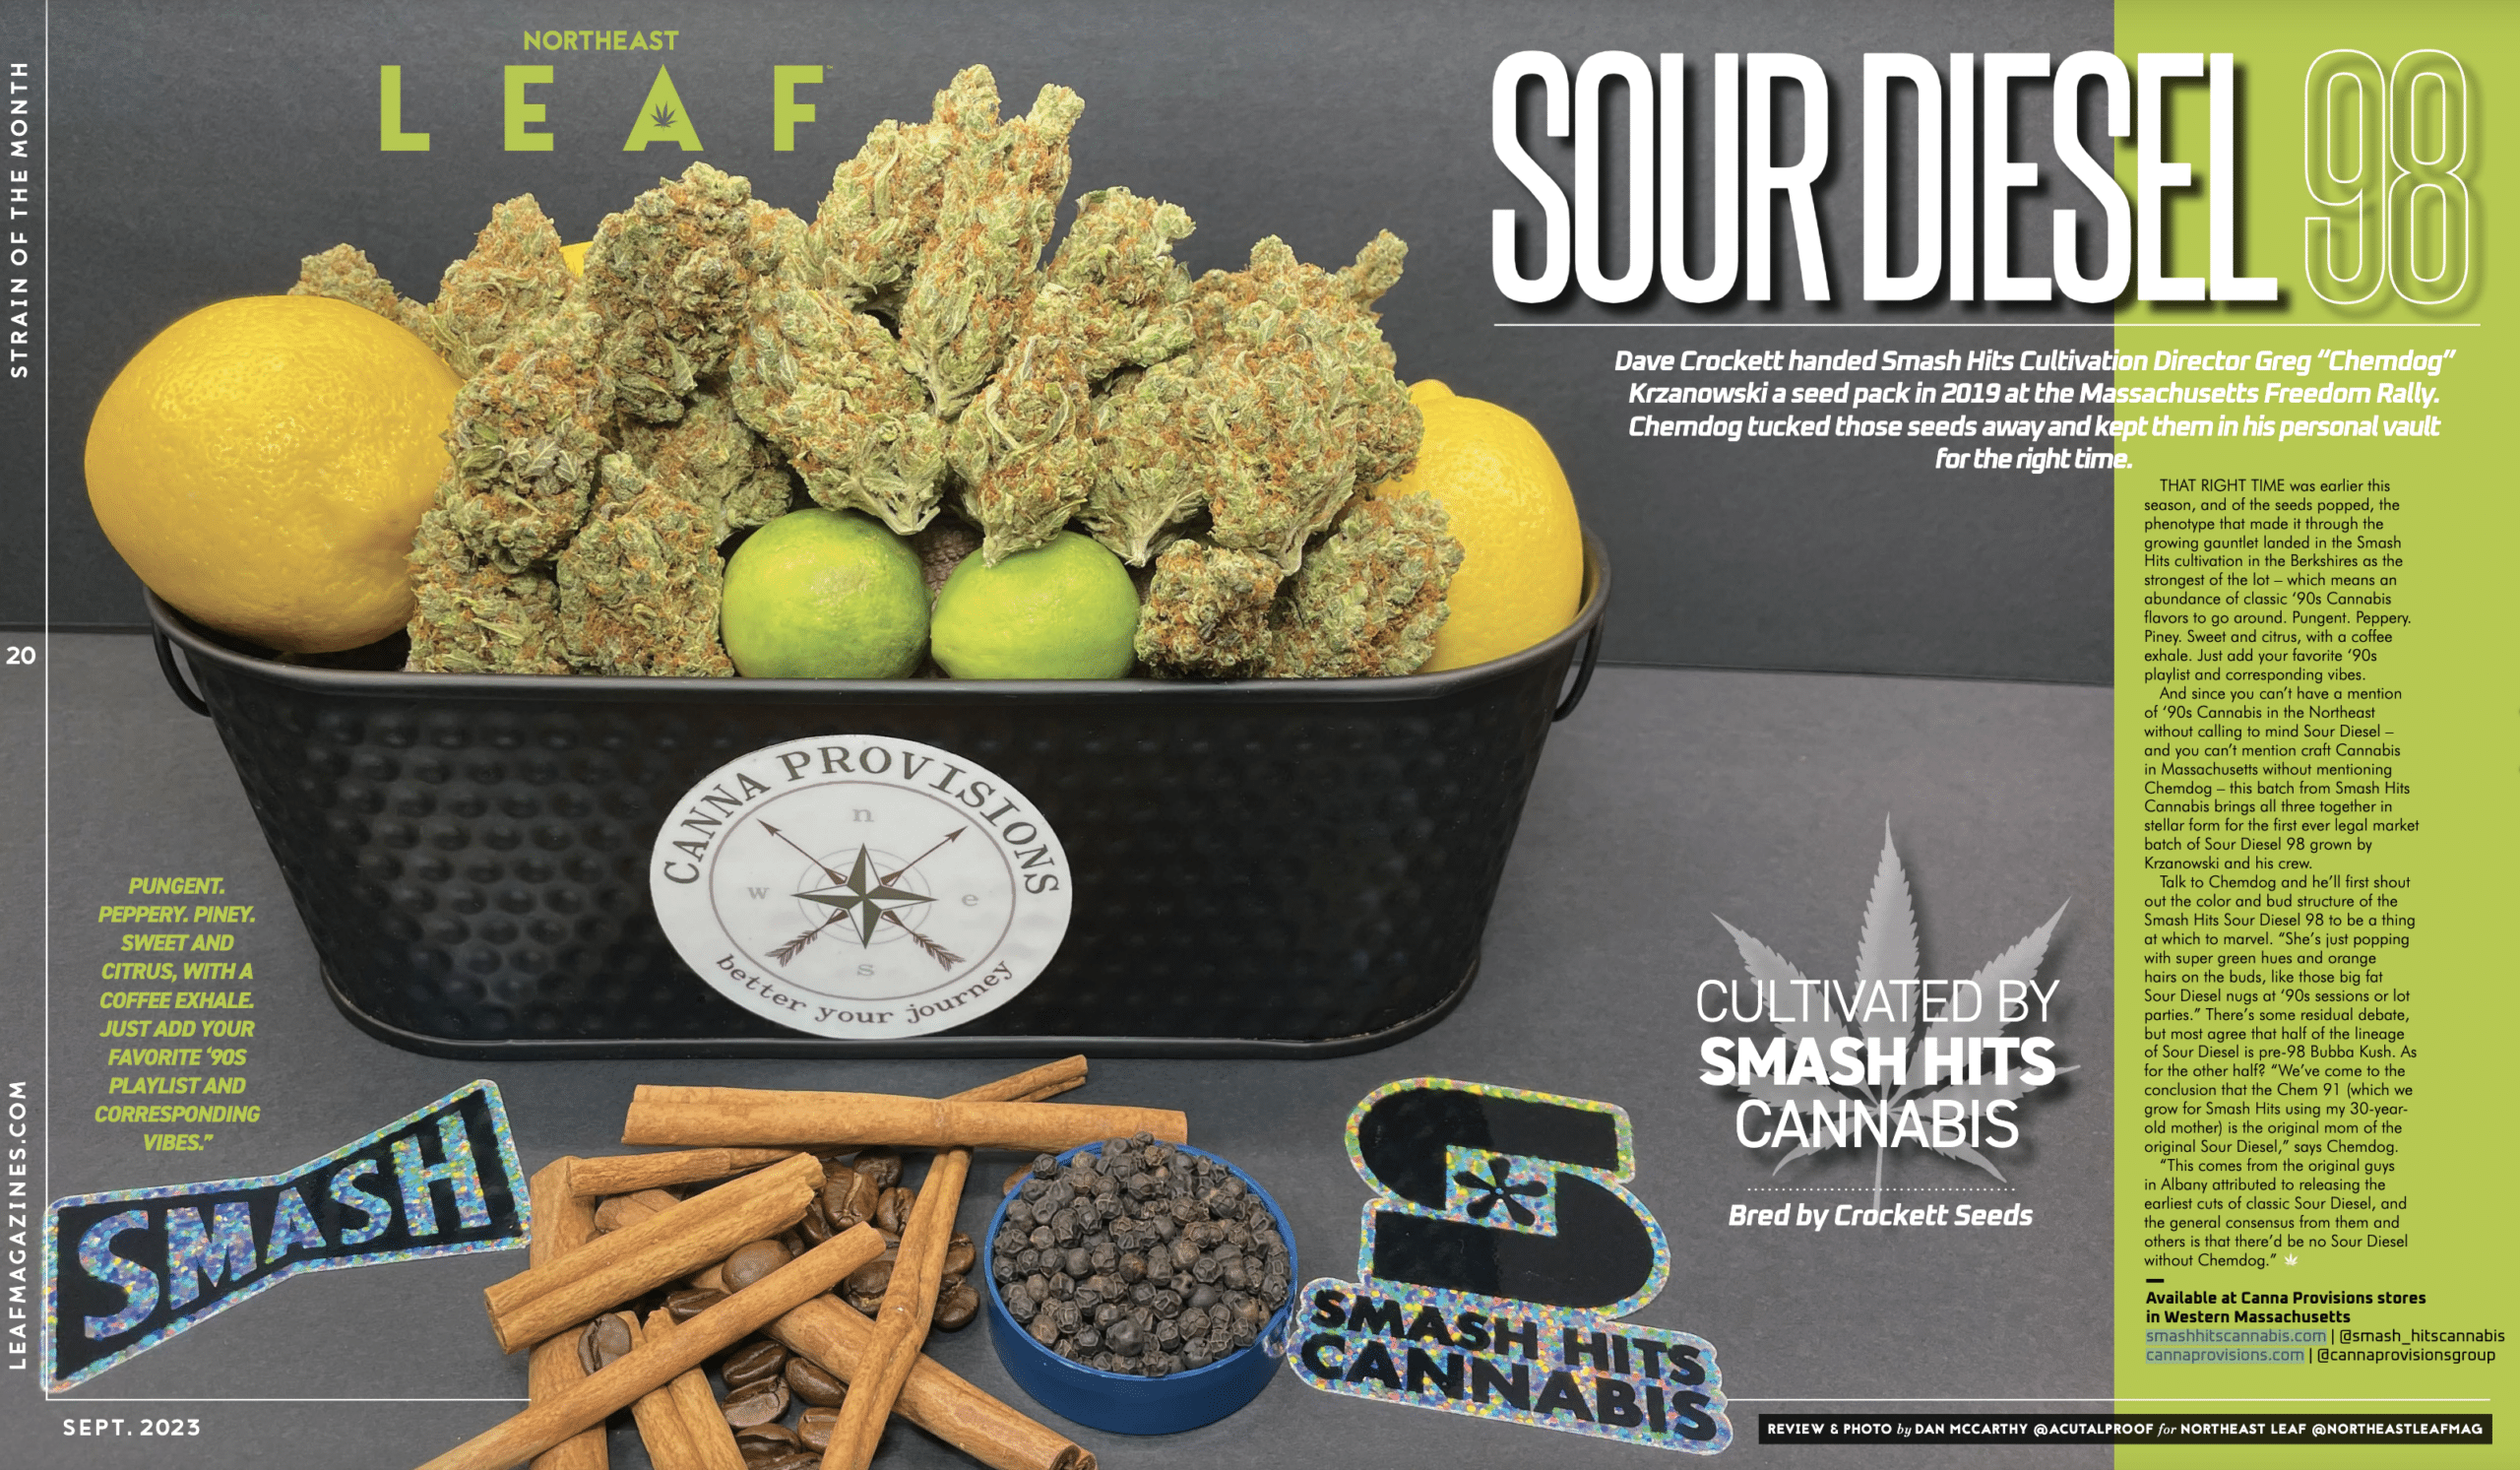 Centerfold spread of the Strain of the Month for Northeast Leaf Magazine featuring Sour Diesel 98 by Smash HIts cannabis